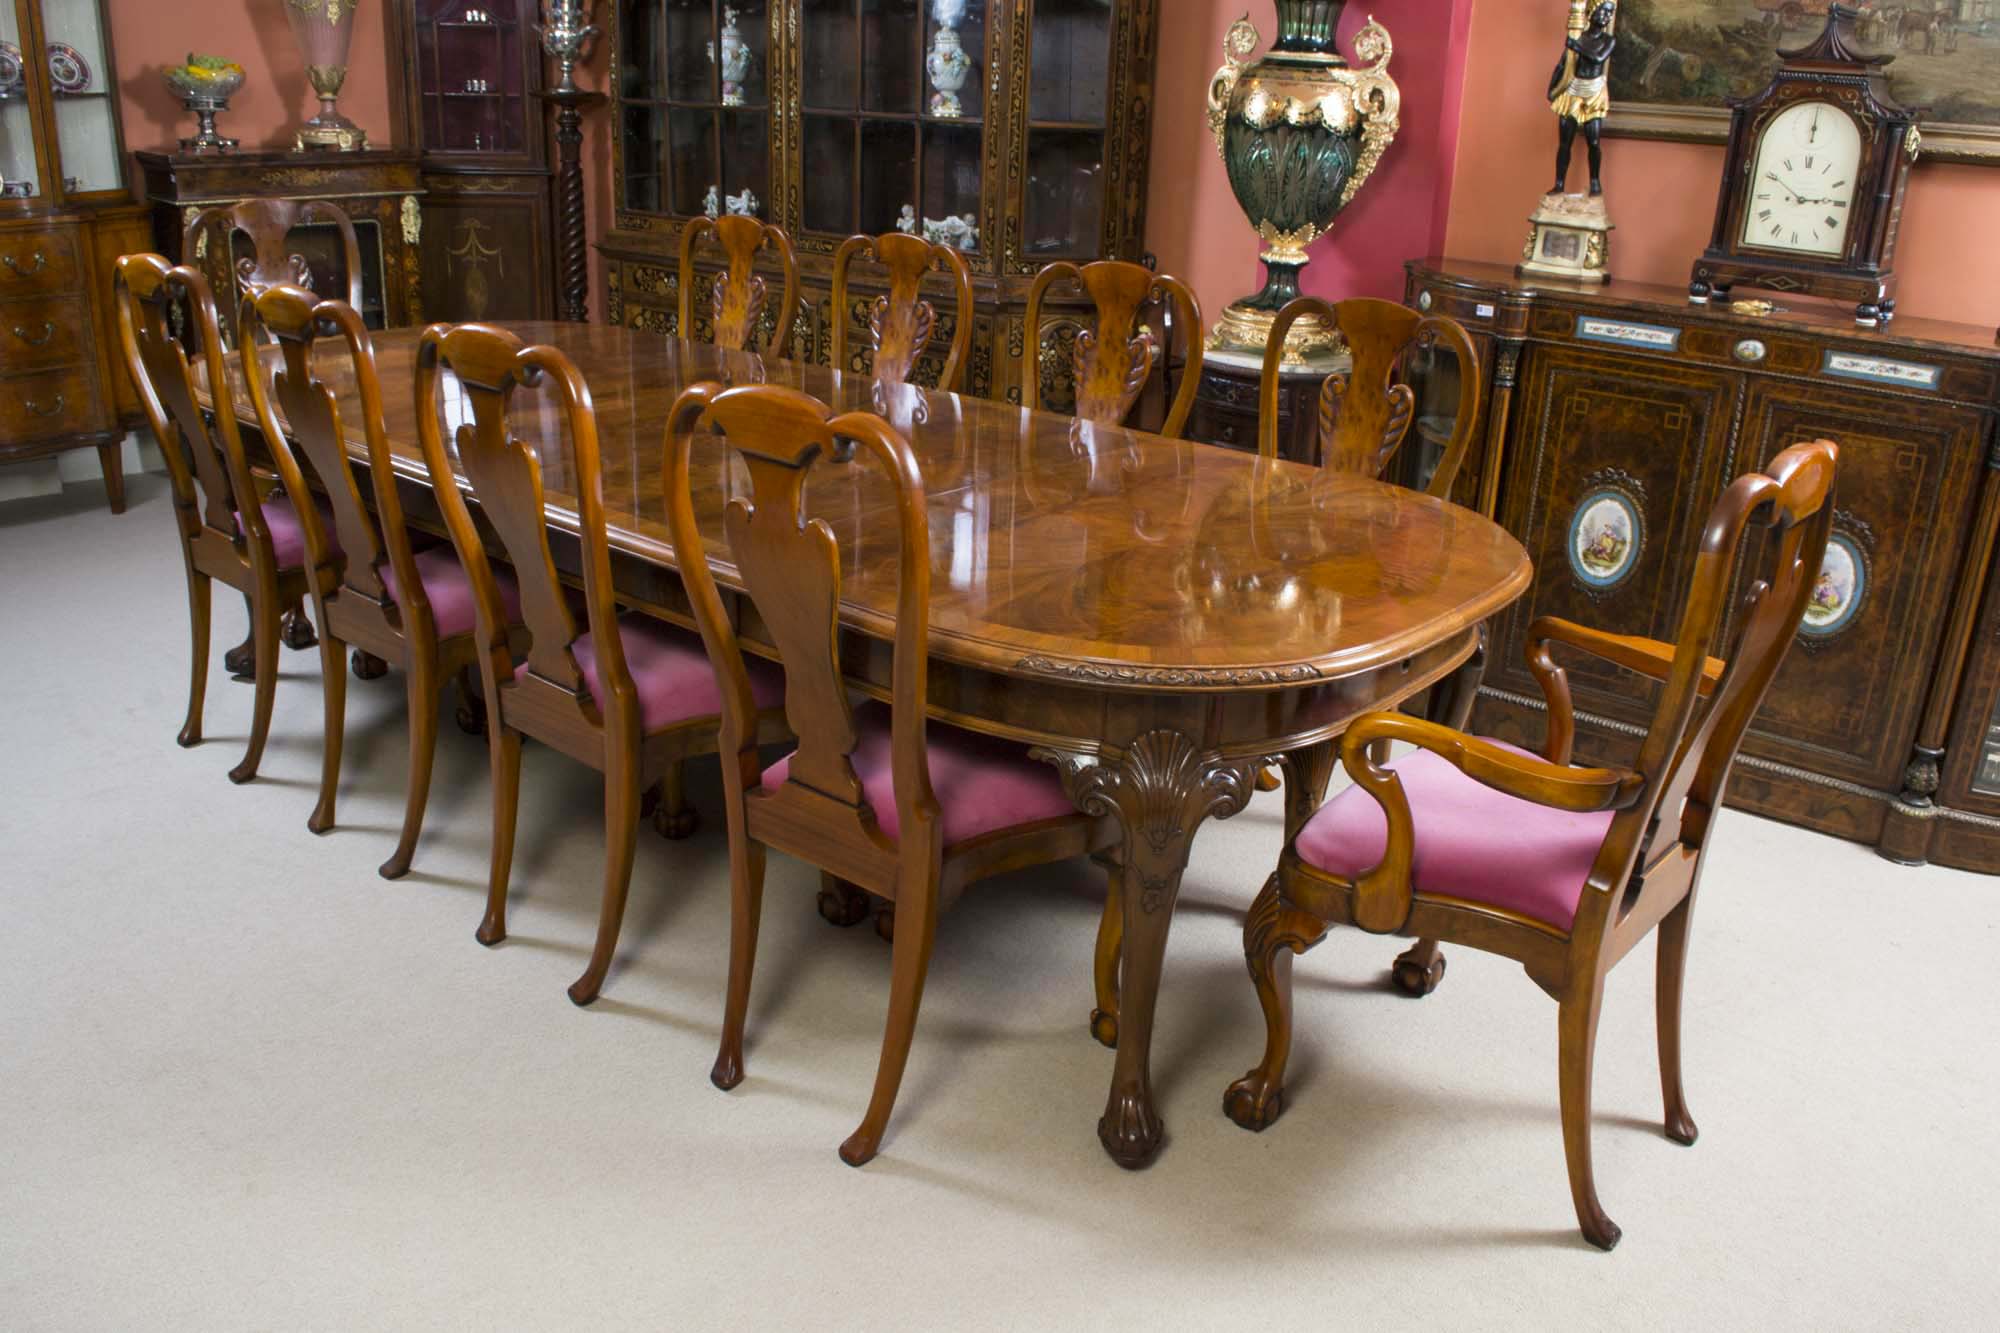 Queen Anne Dining Room Table And Chairs